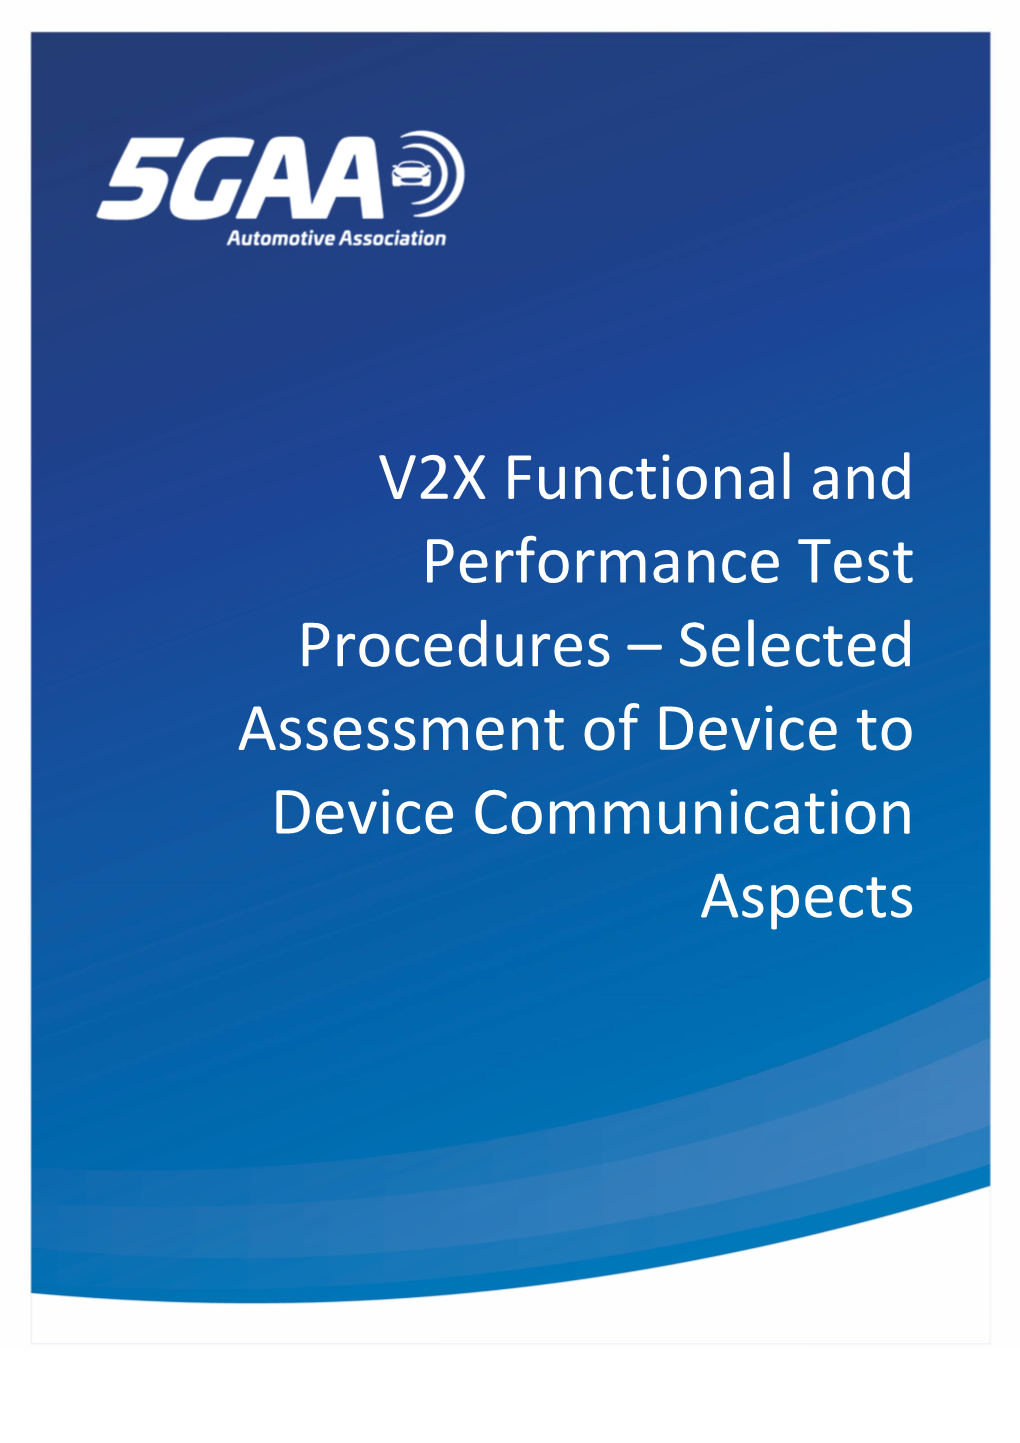 V2X Functional and Performance Test Procedures – Selected Assessment of Device to Device Communication Aspects